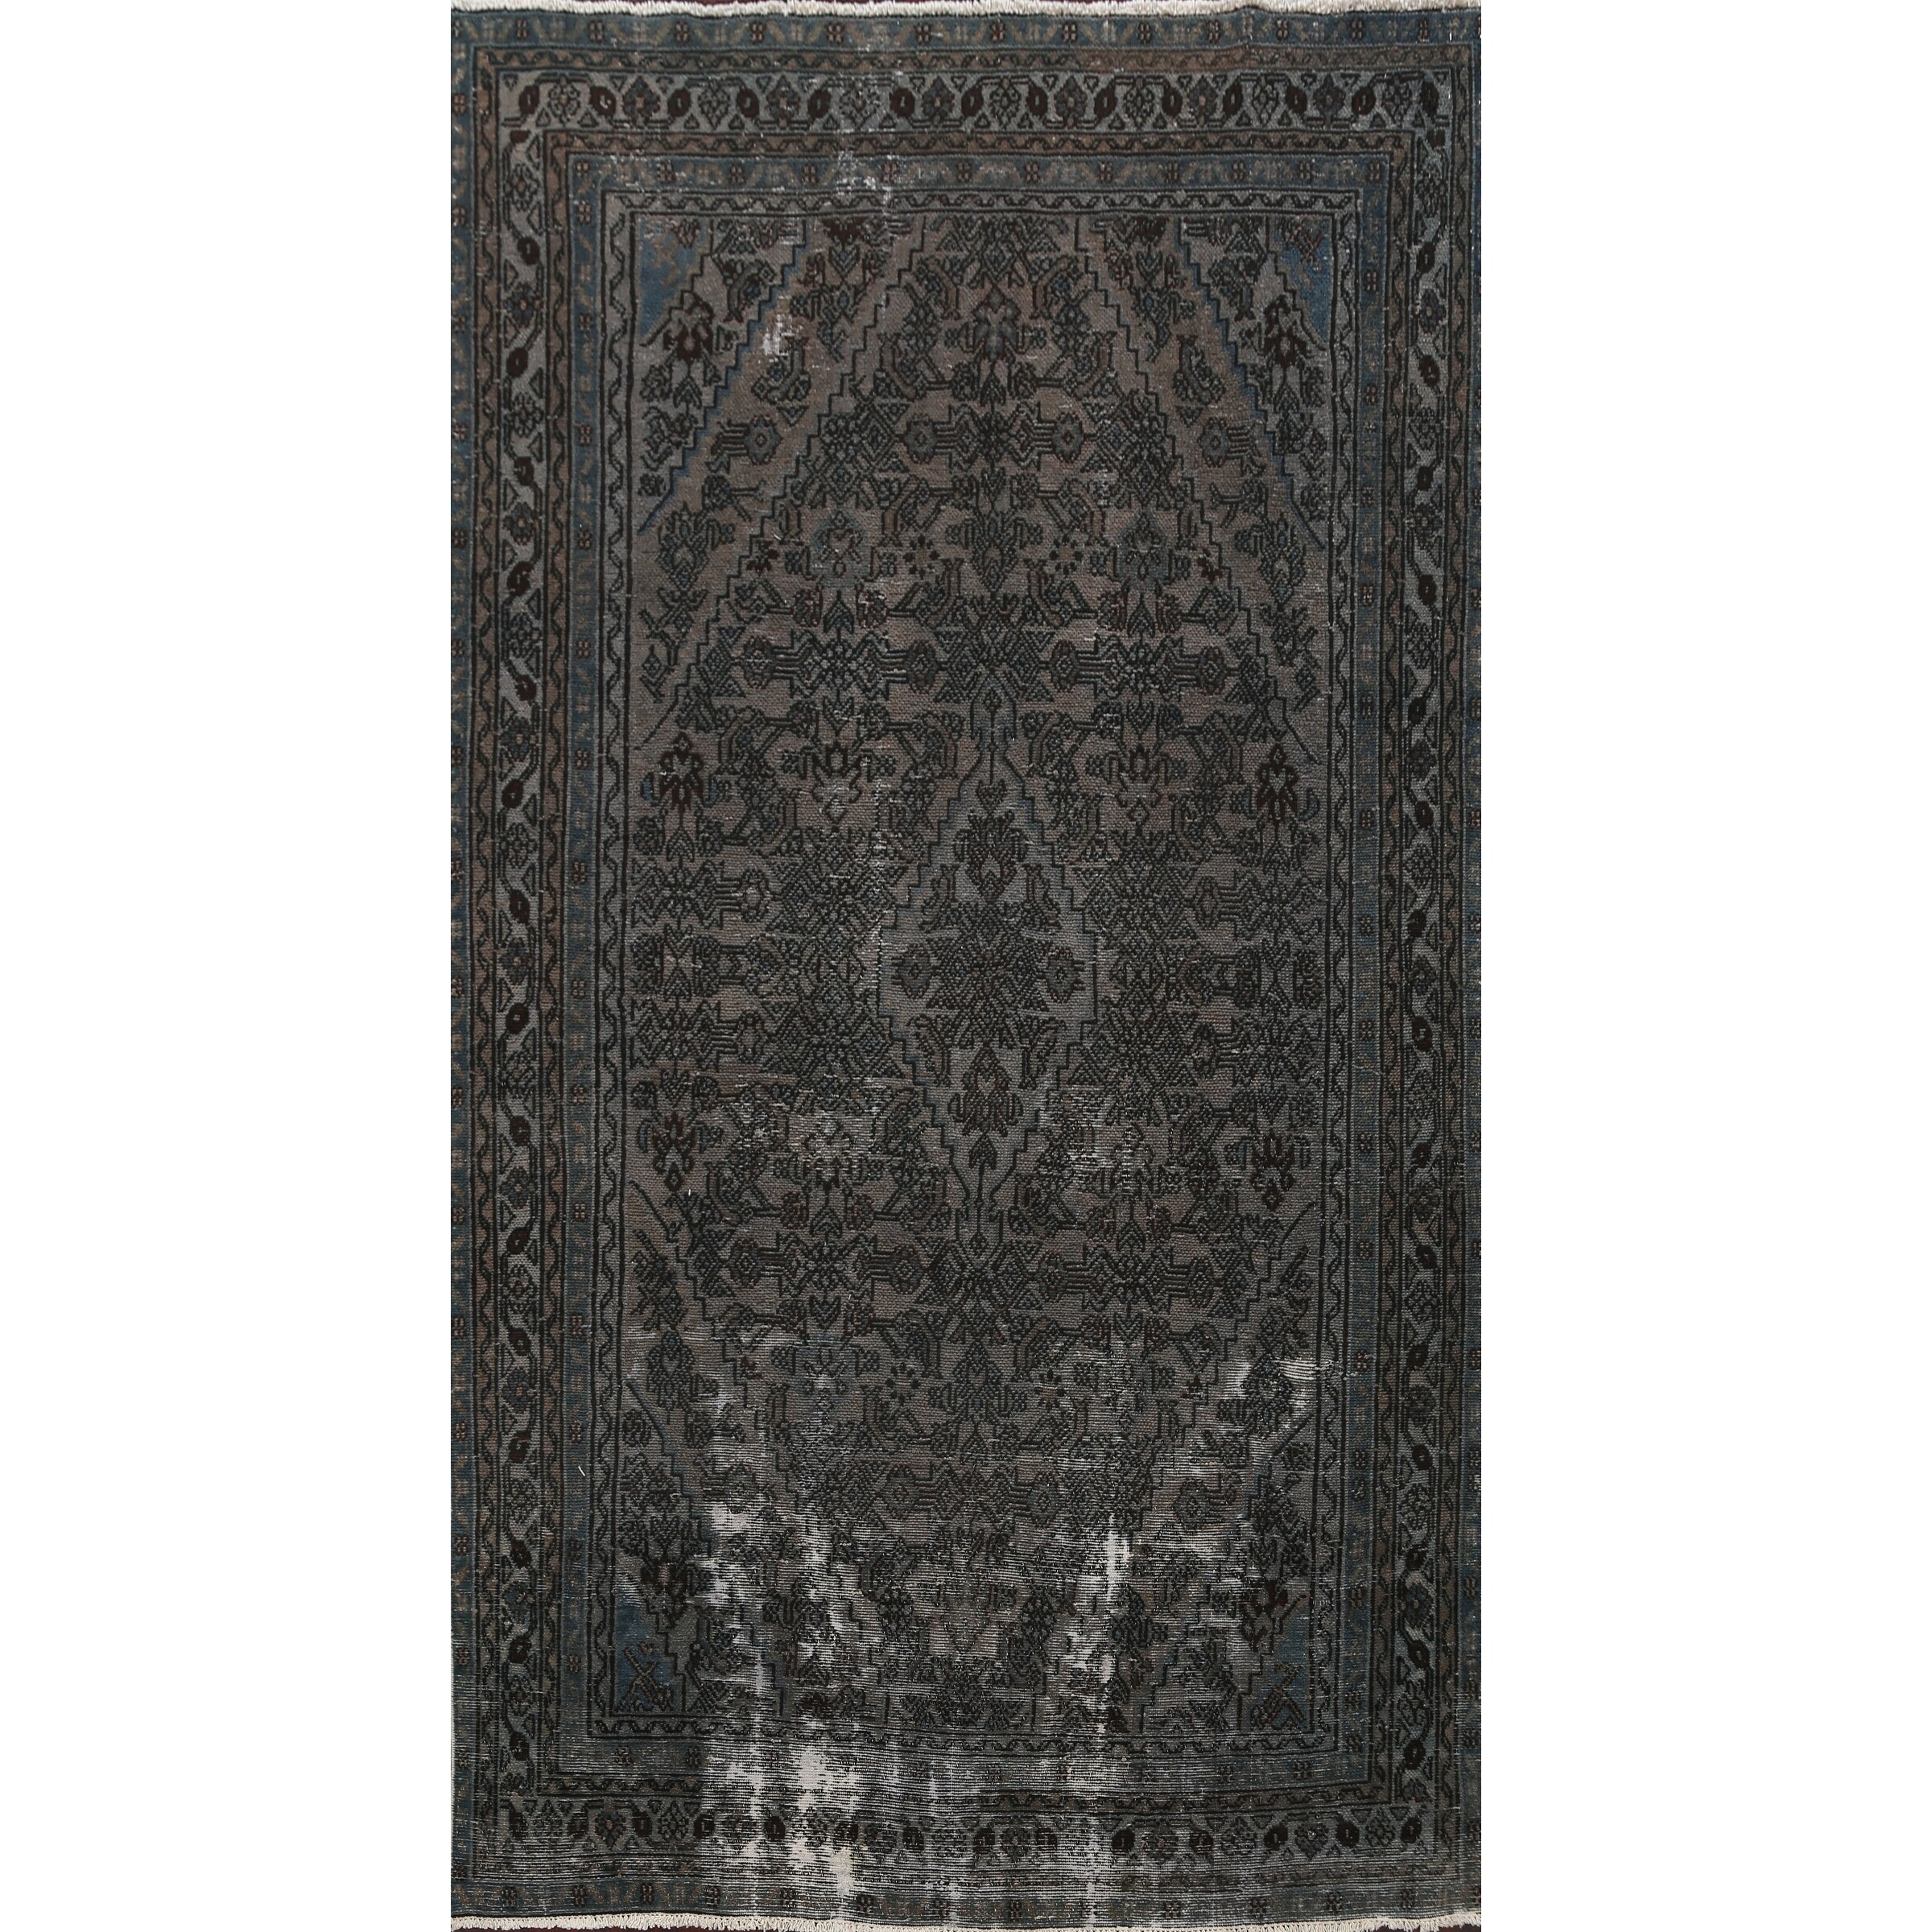 Over-dye Distressed Hamedan Persian Area Rug Wool Hand-knotted - 6'2